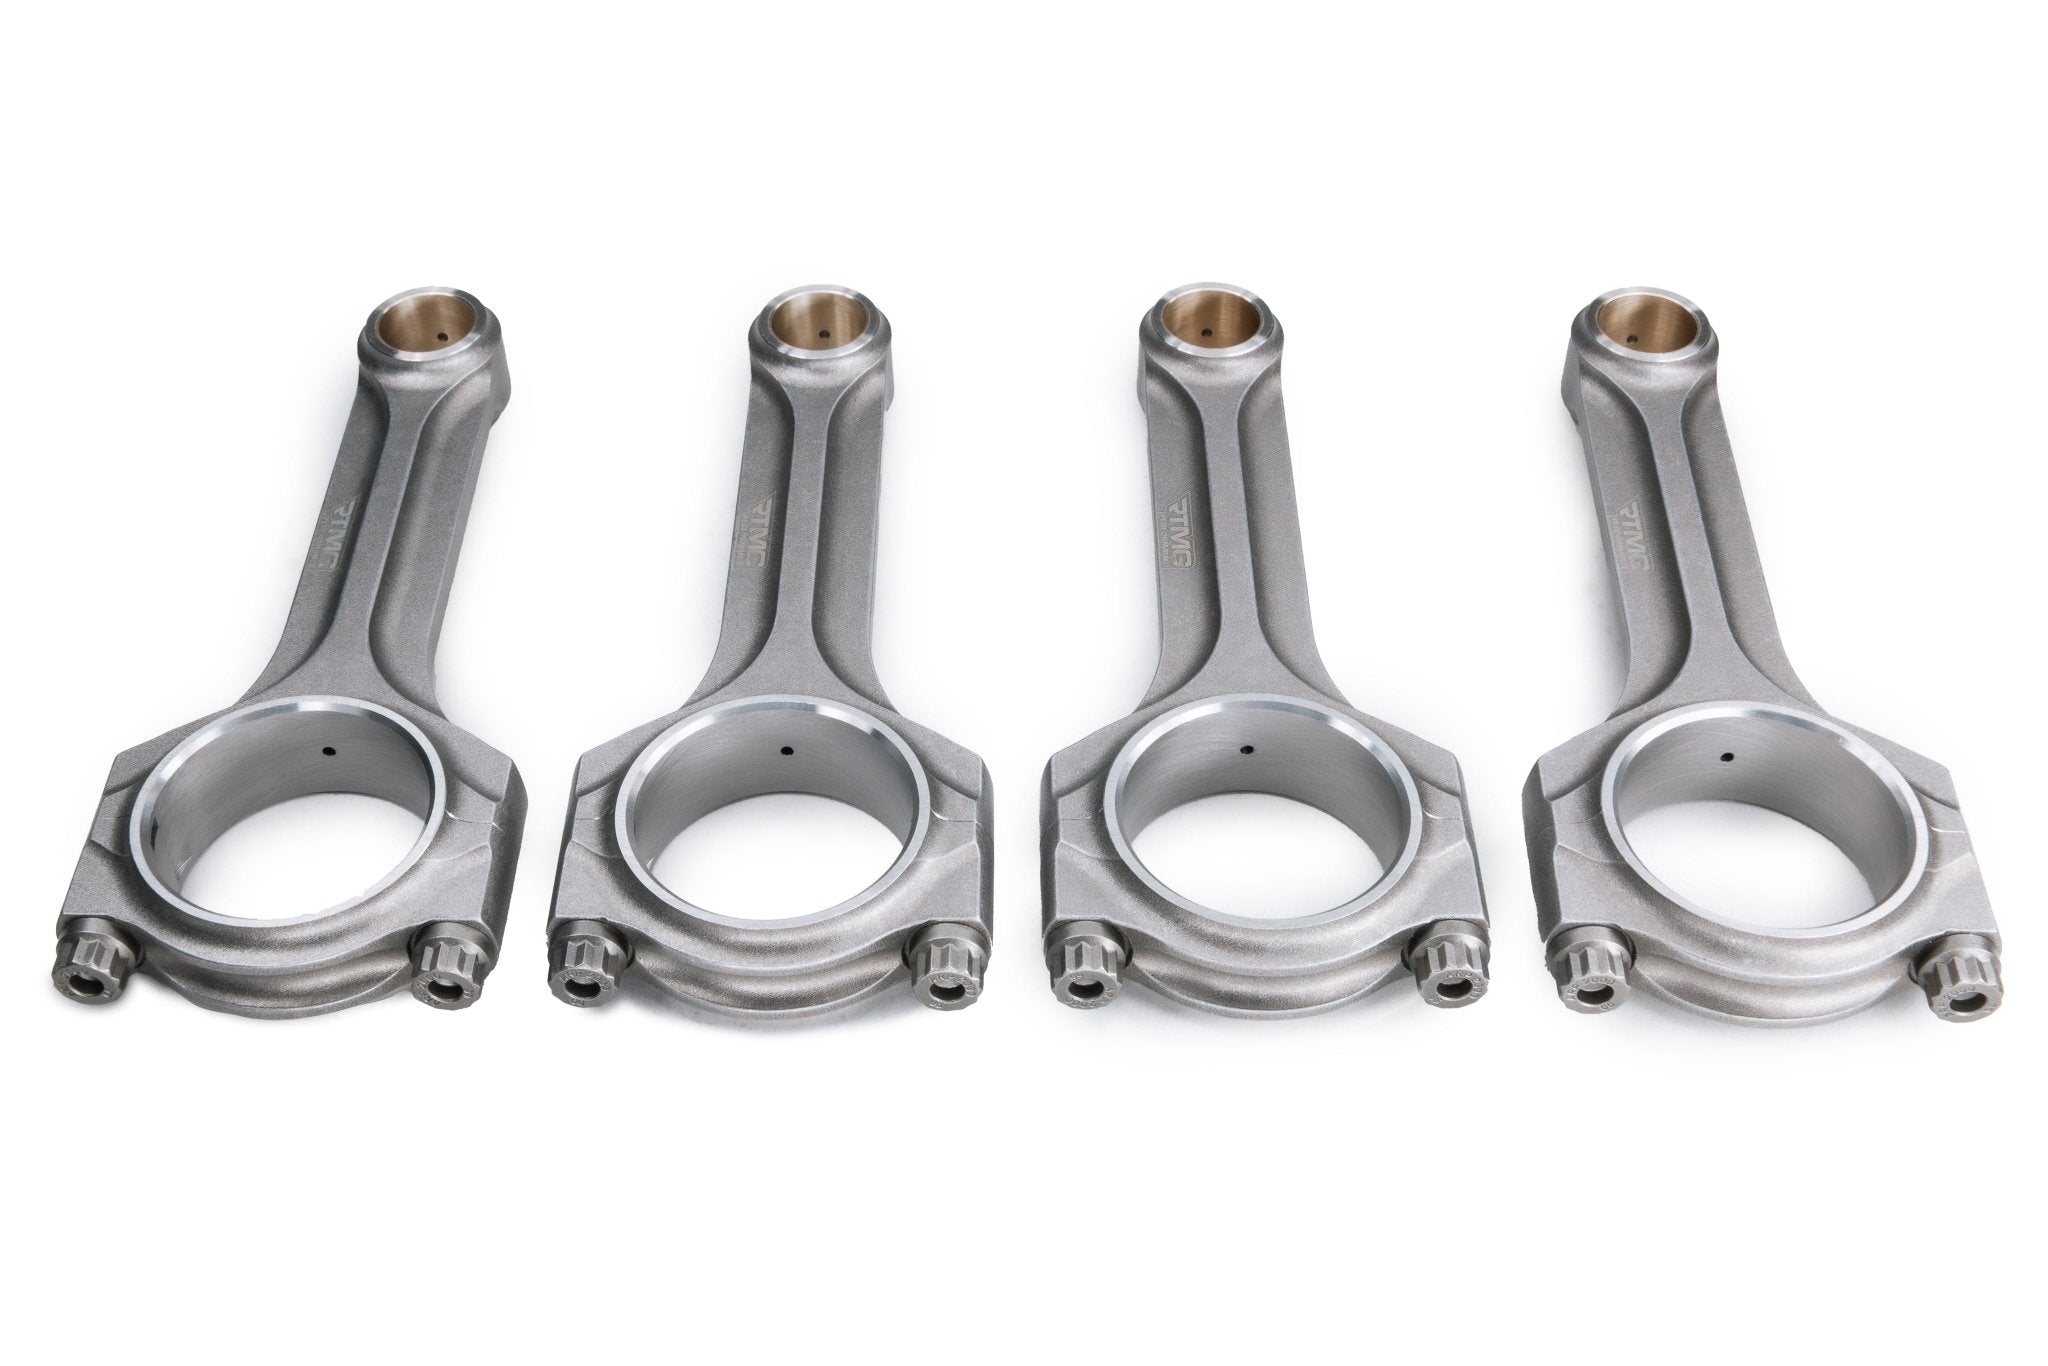 Connecting Rods Set X-Beam for 2.0 TSI EA888 Gen 2 - Up to 1000HP+ ( 21mm Piston Pin Size ) - RTMG Performance